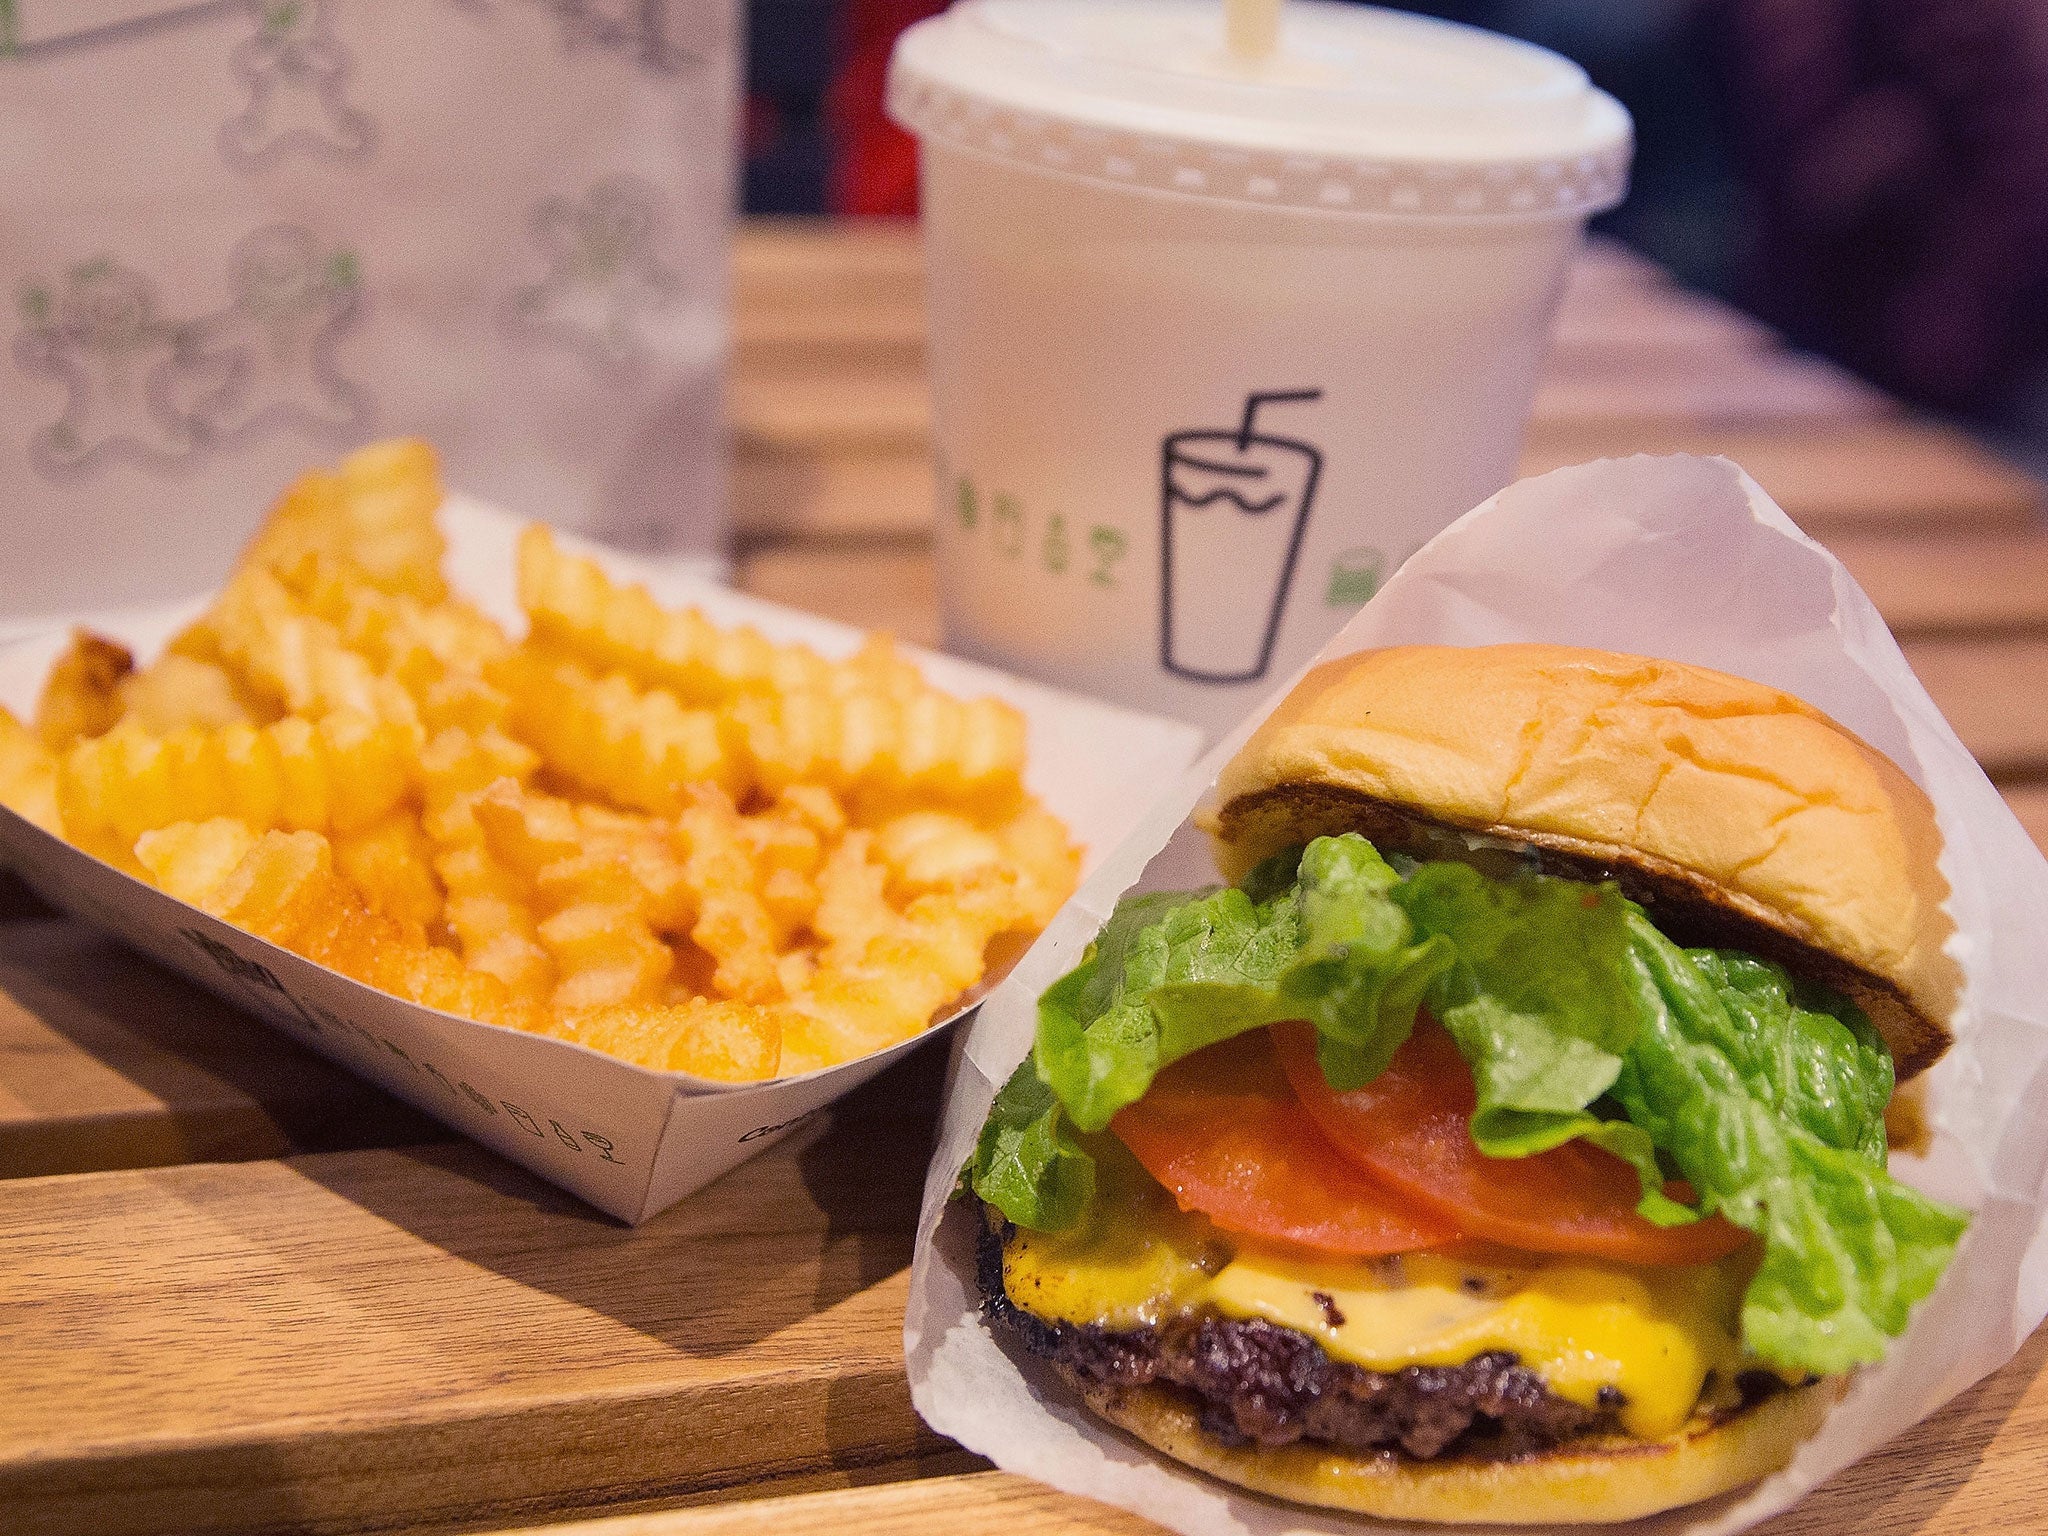 Shake Shack opened its first permanent kiosk in 2004 and can now be found in 63 locations around the world